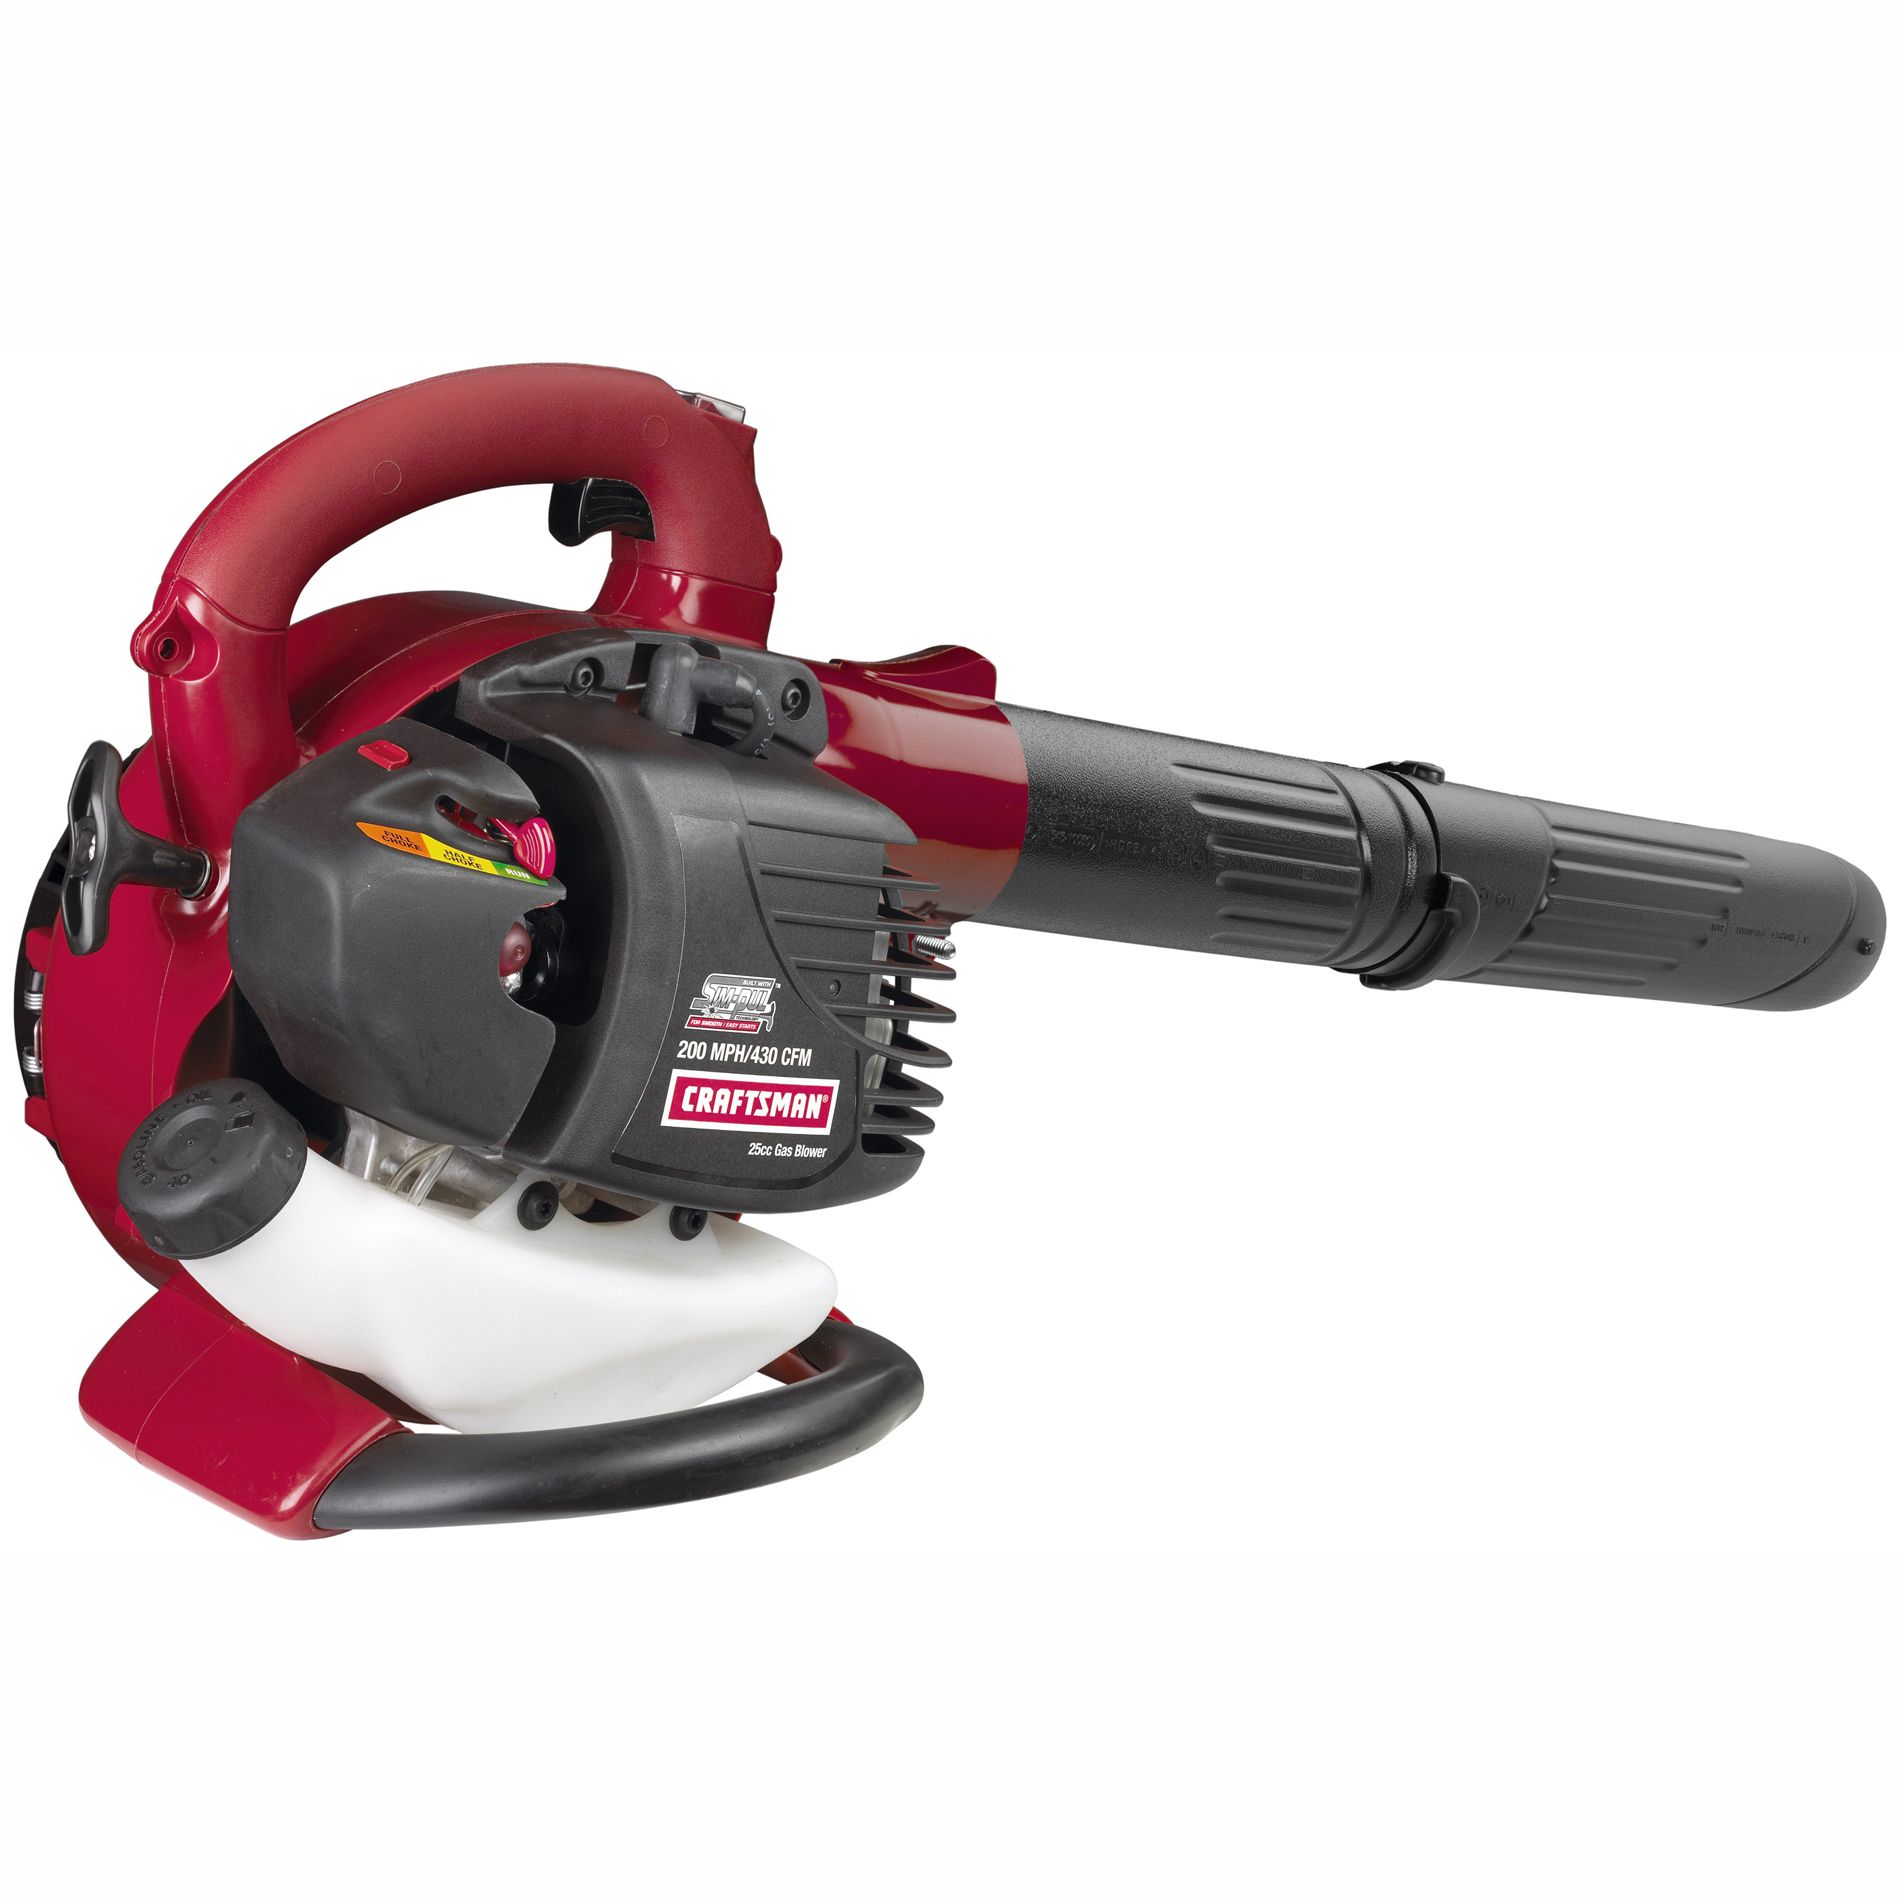 Craftsman 25cc Gas Blower: Craftsman Power Tools Only at Sears Spark Plug For Craftsman Leaf Blower